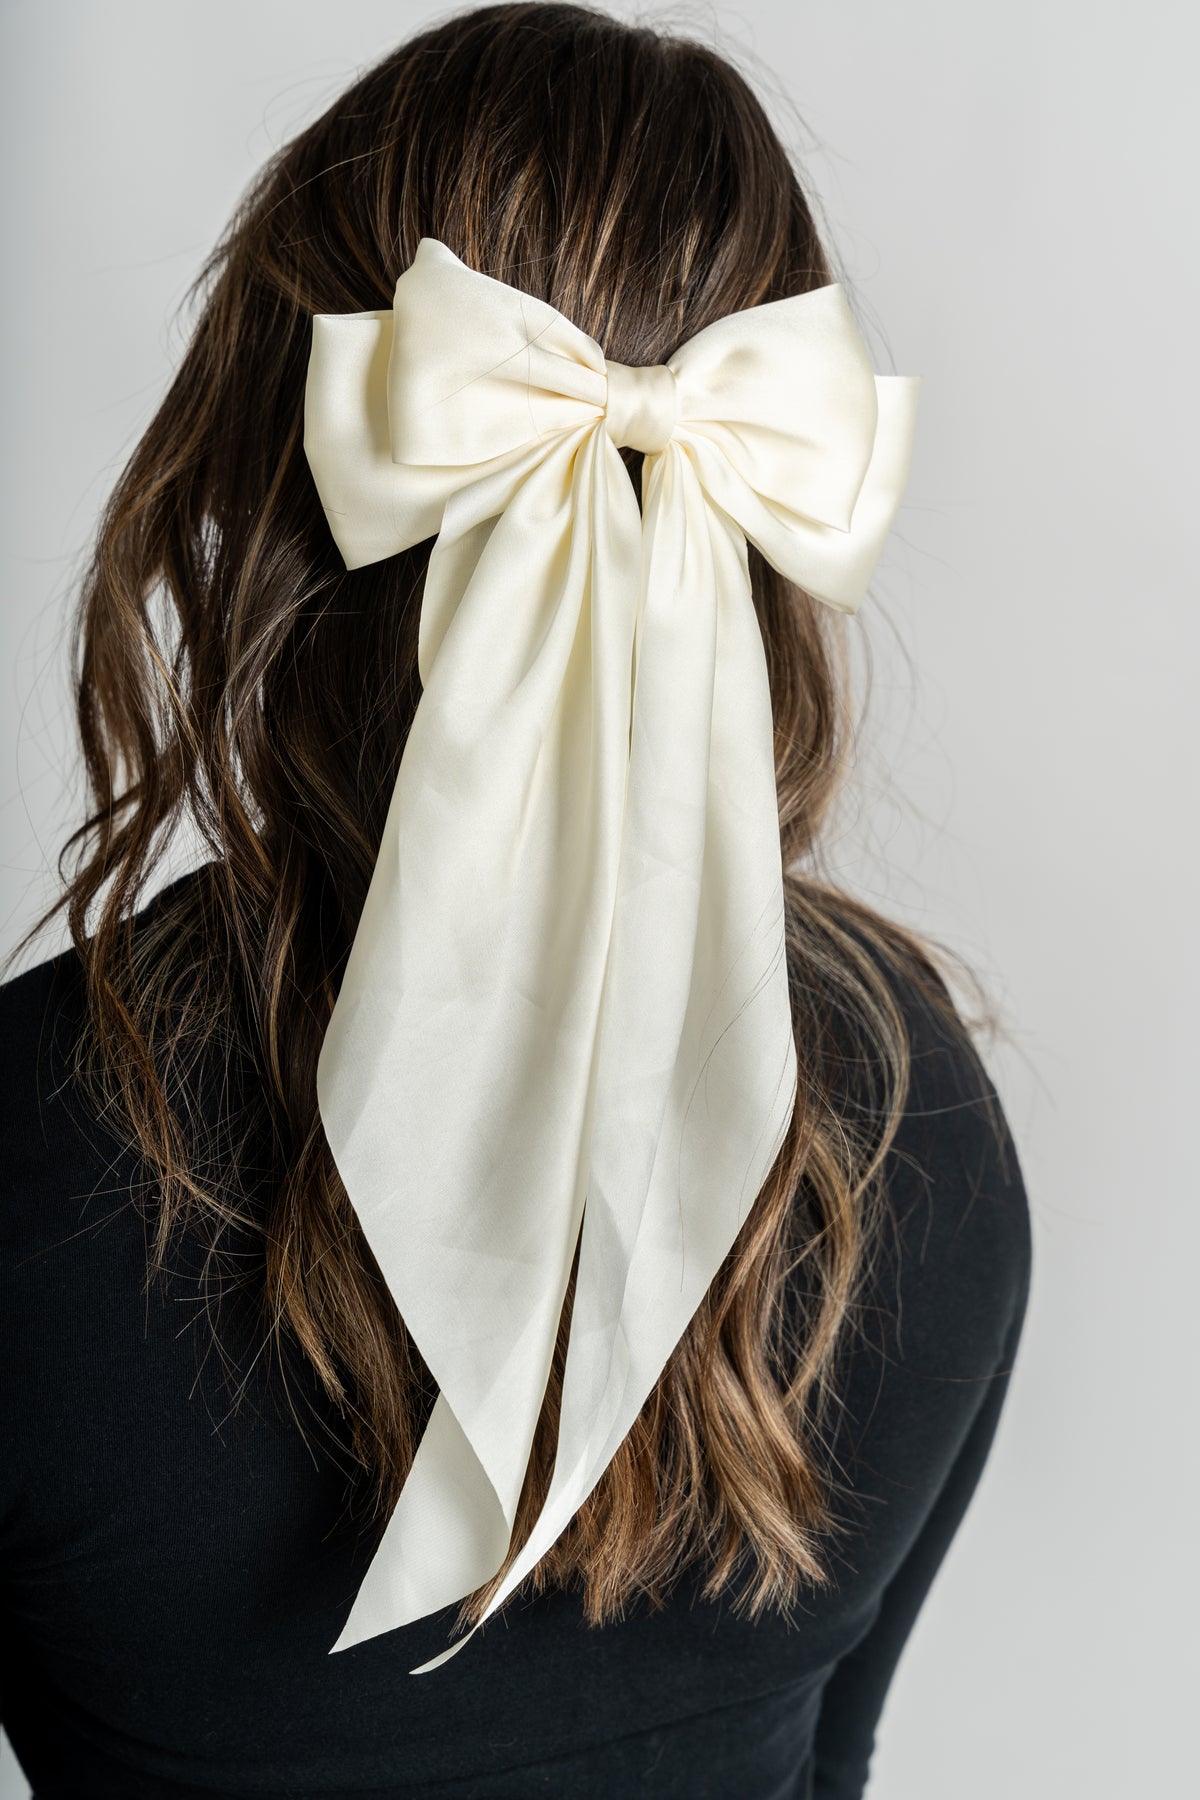 Butterfly satin hair bow clip white - Trendy Gifts at Lush Fashion Lounge Boutique in Oklahoma City